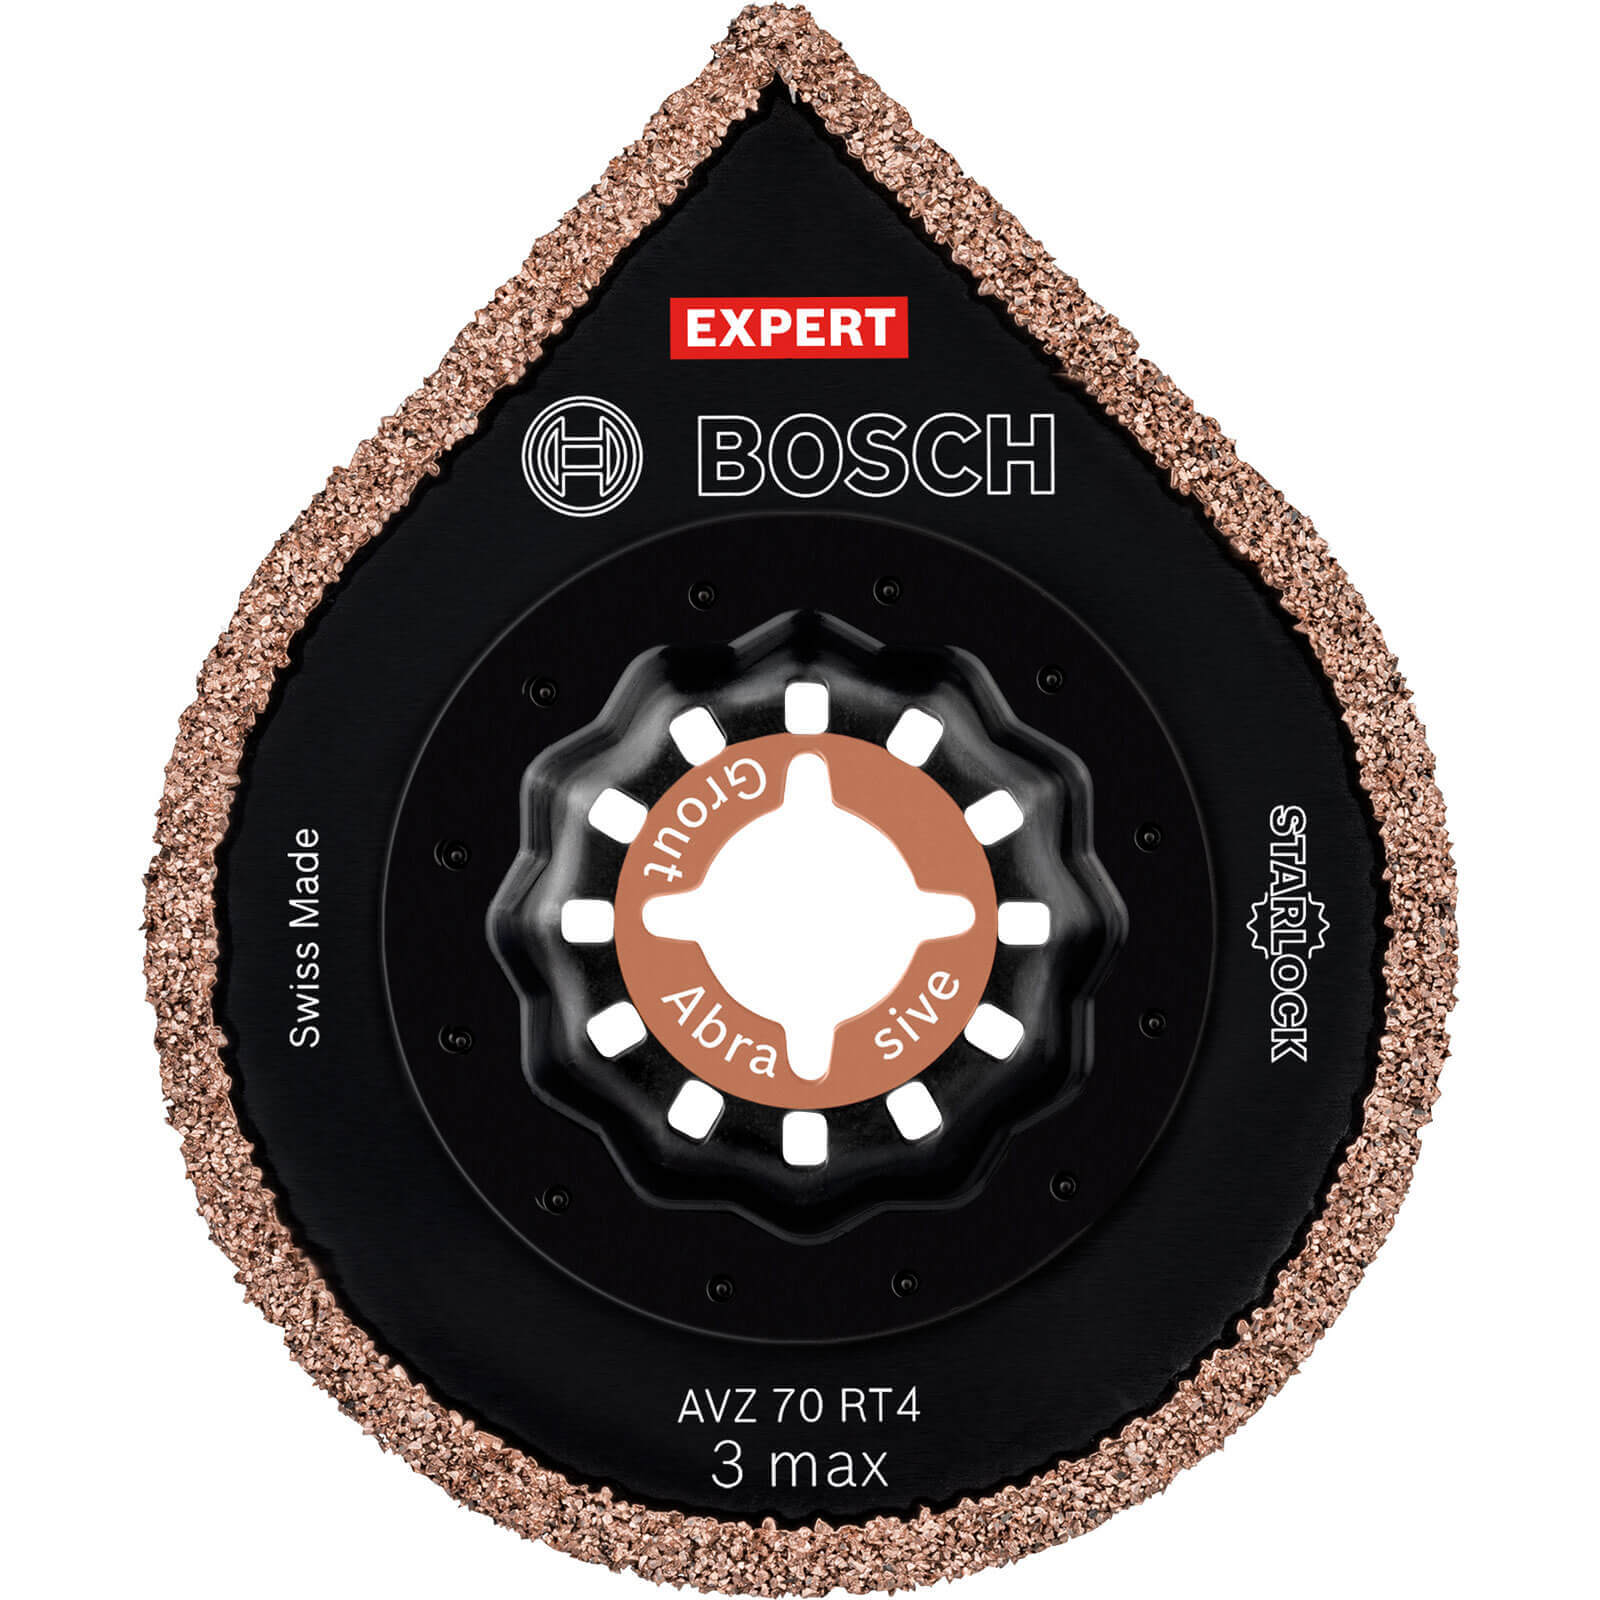 Bosch Expert AVZ 70 RT4 Abrasive and Grout Oscillating Multi Tool Removal Blade 70mm Pack of 10